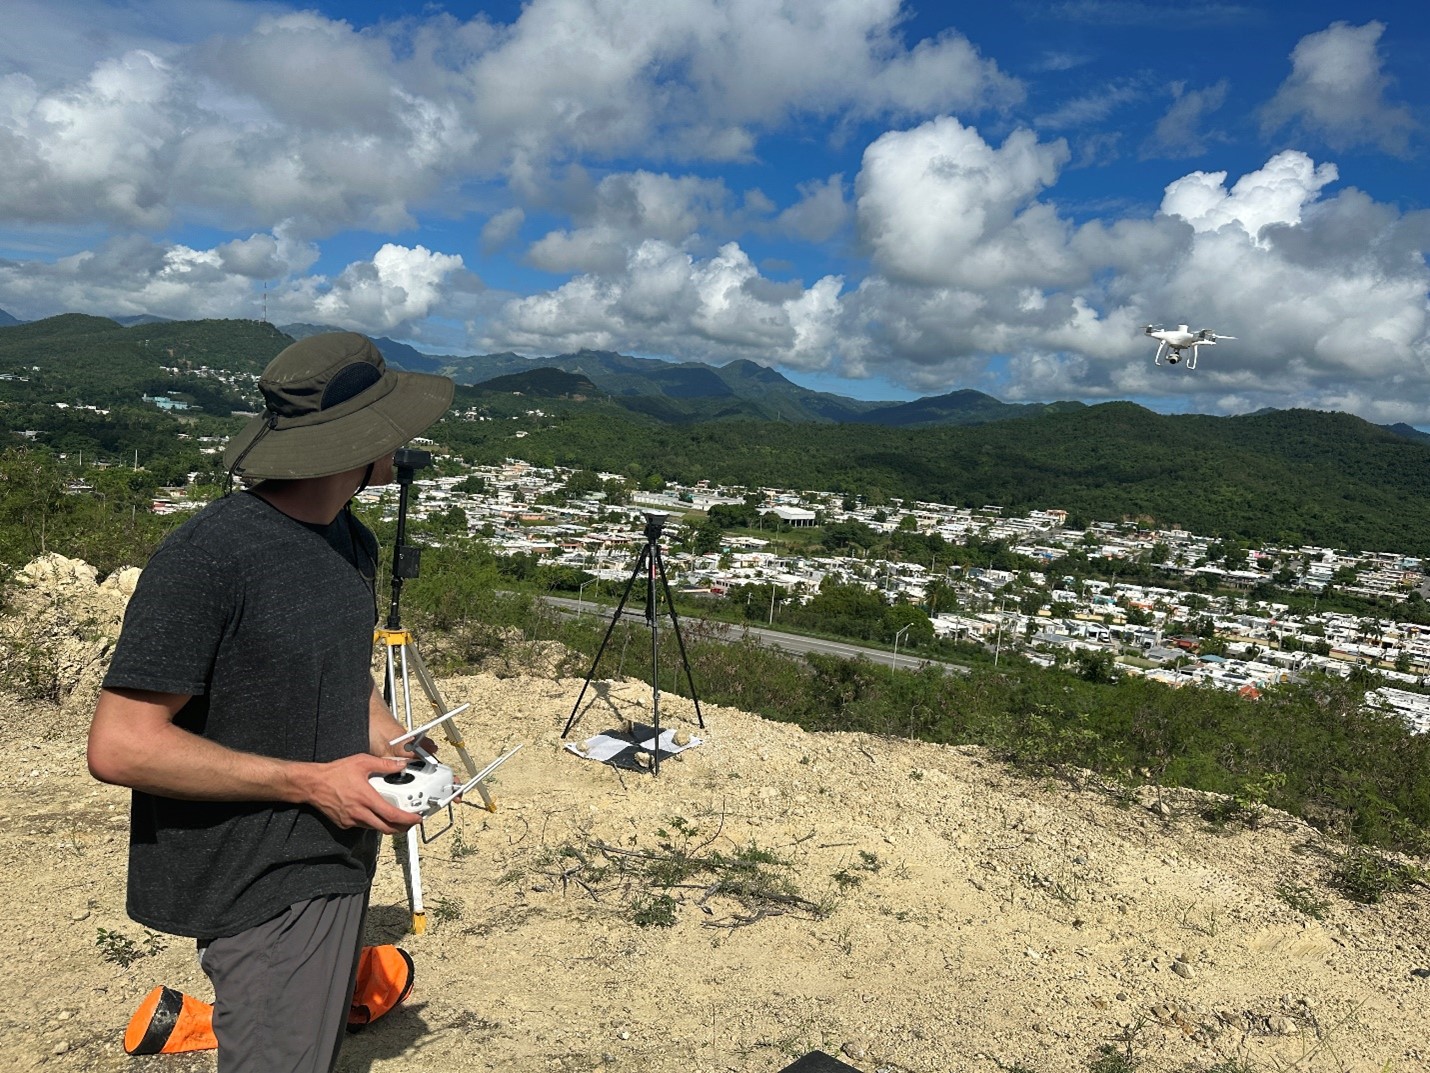 Drew Gomberg flying the Phantom RTK drone to map a landslide in Ponce